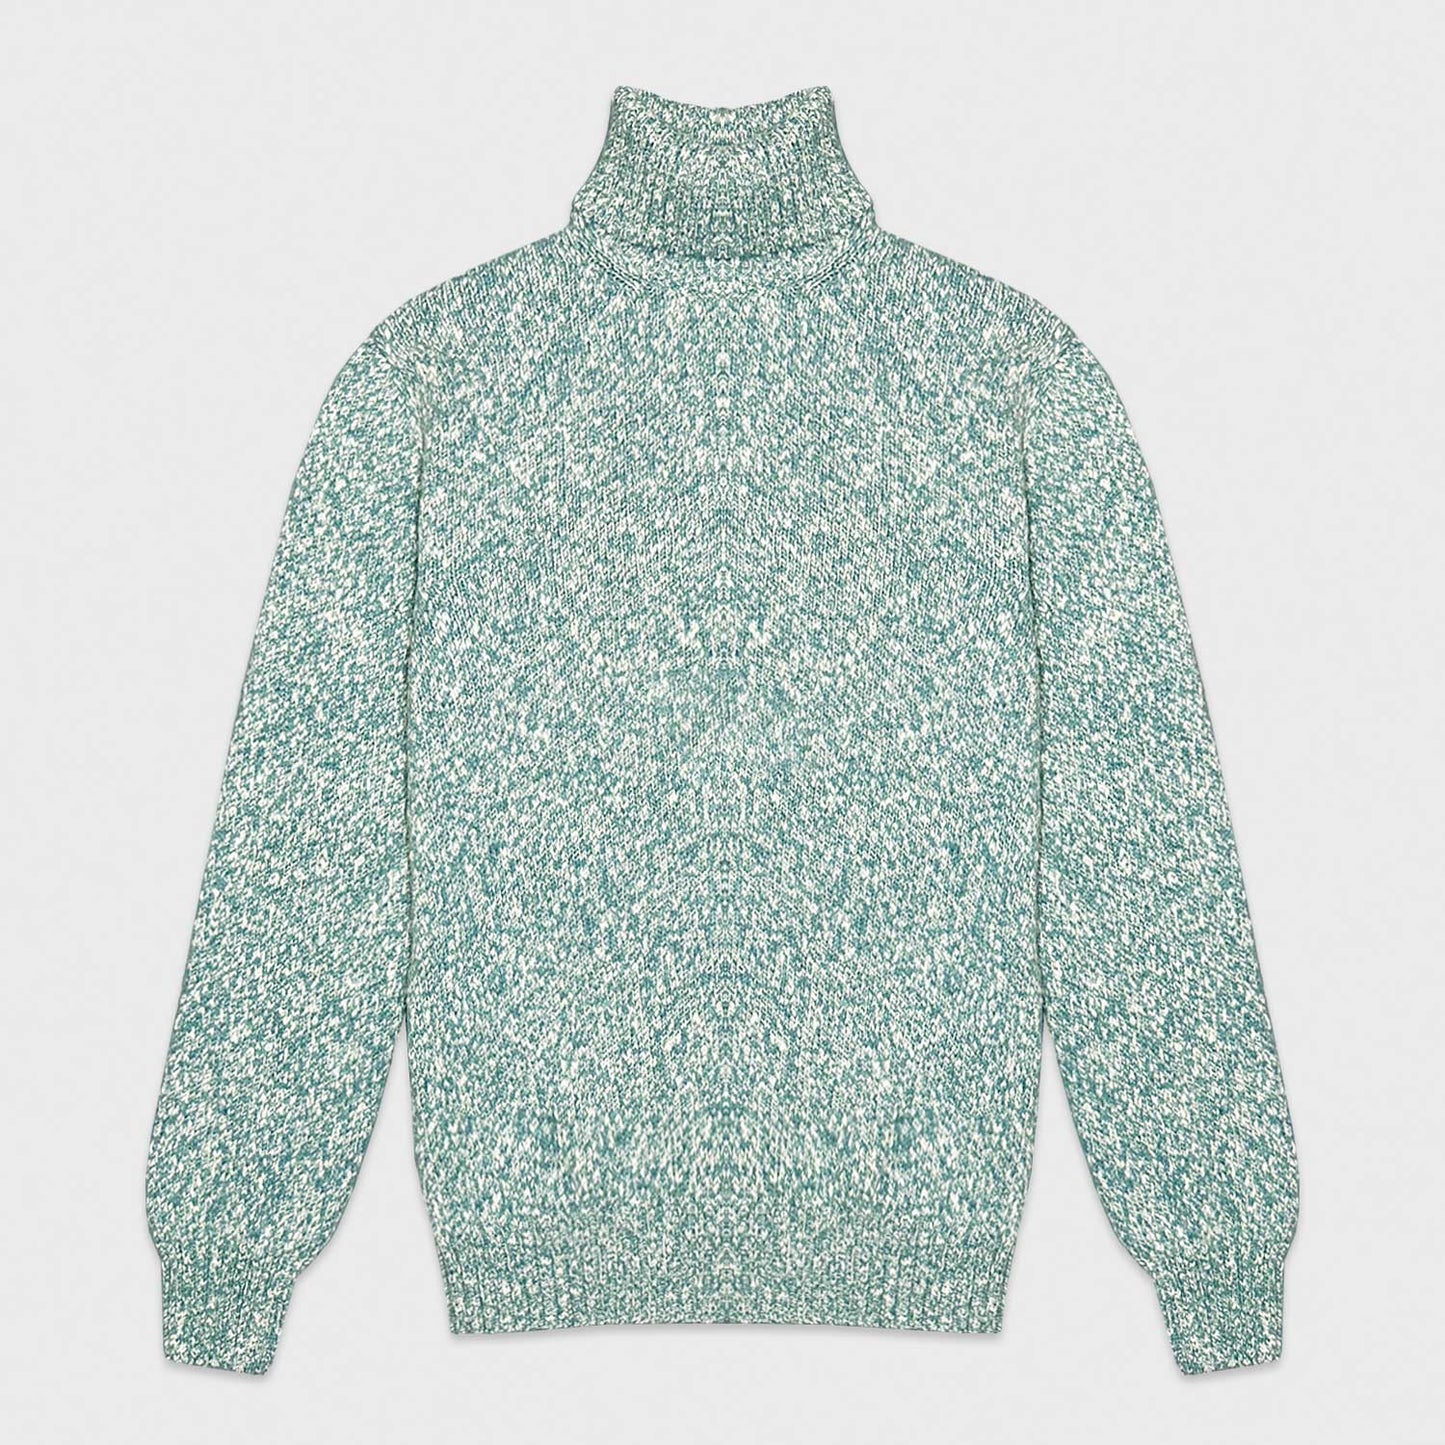 Teal Green Mouliné Turtleneck Wool Sweater Cruciani. No winter without an mouliné wool turtleneck warm and soft! This refined mix of teal green and ivory white colors is ideal for many outfits, perfect to wear with a blazer or with a coat on cold days.